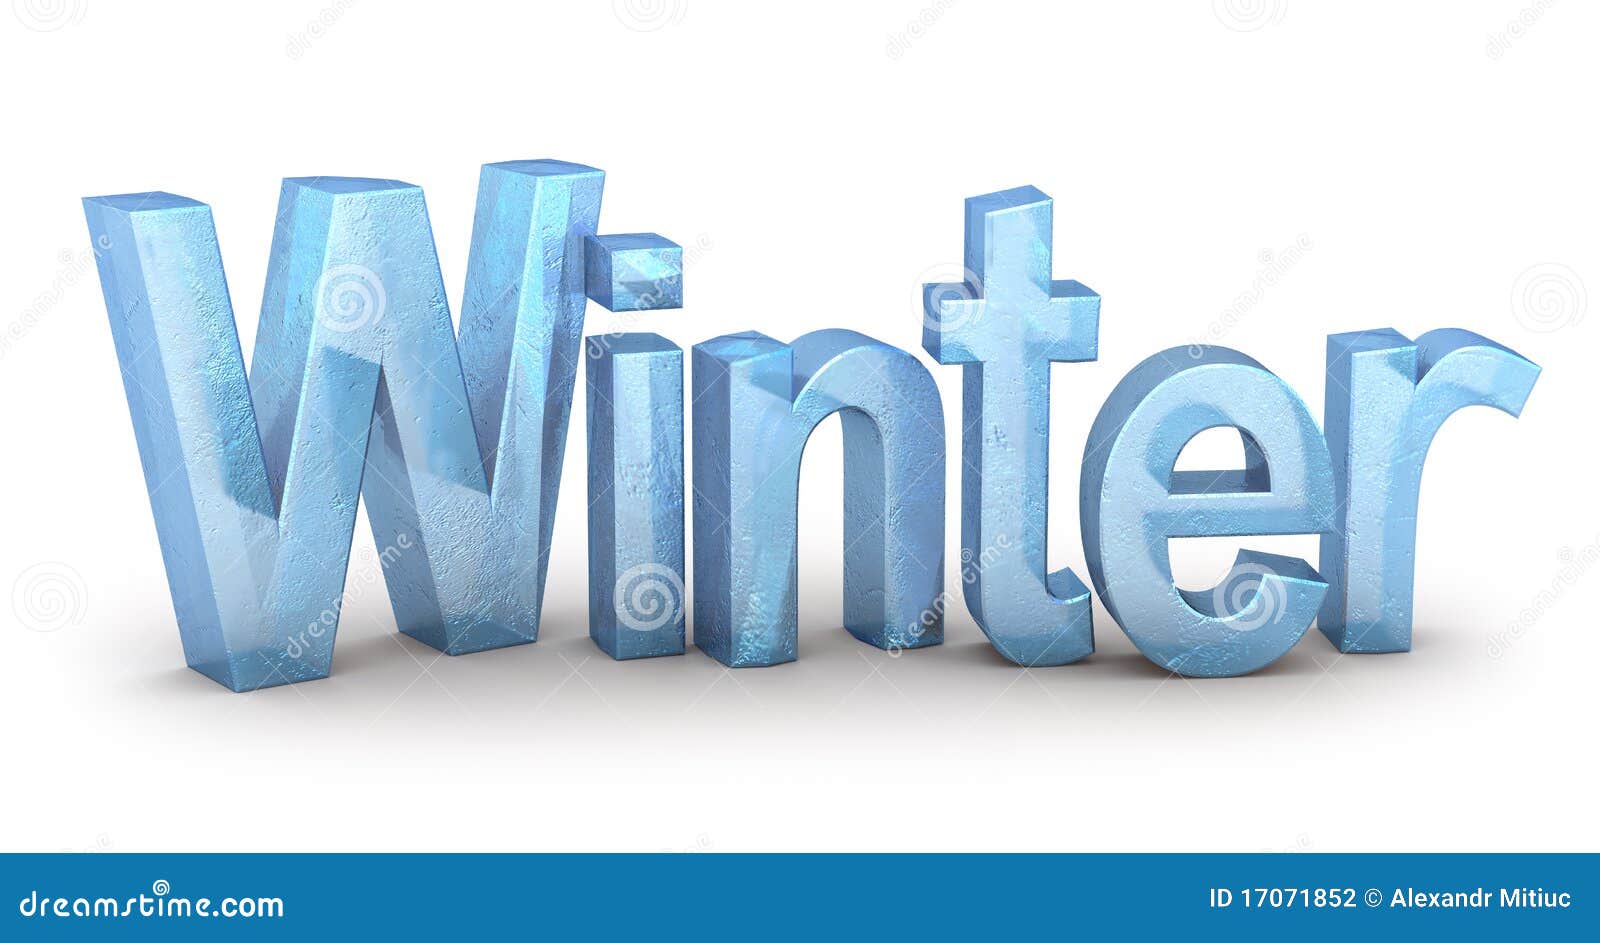 snowflake clipart in word - photo #19